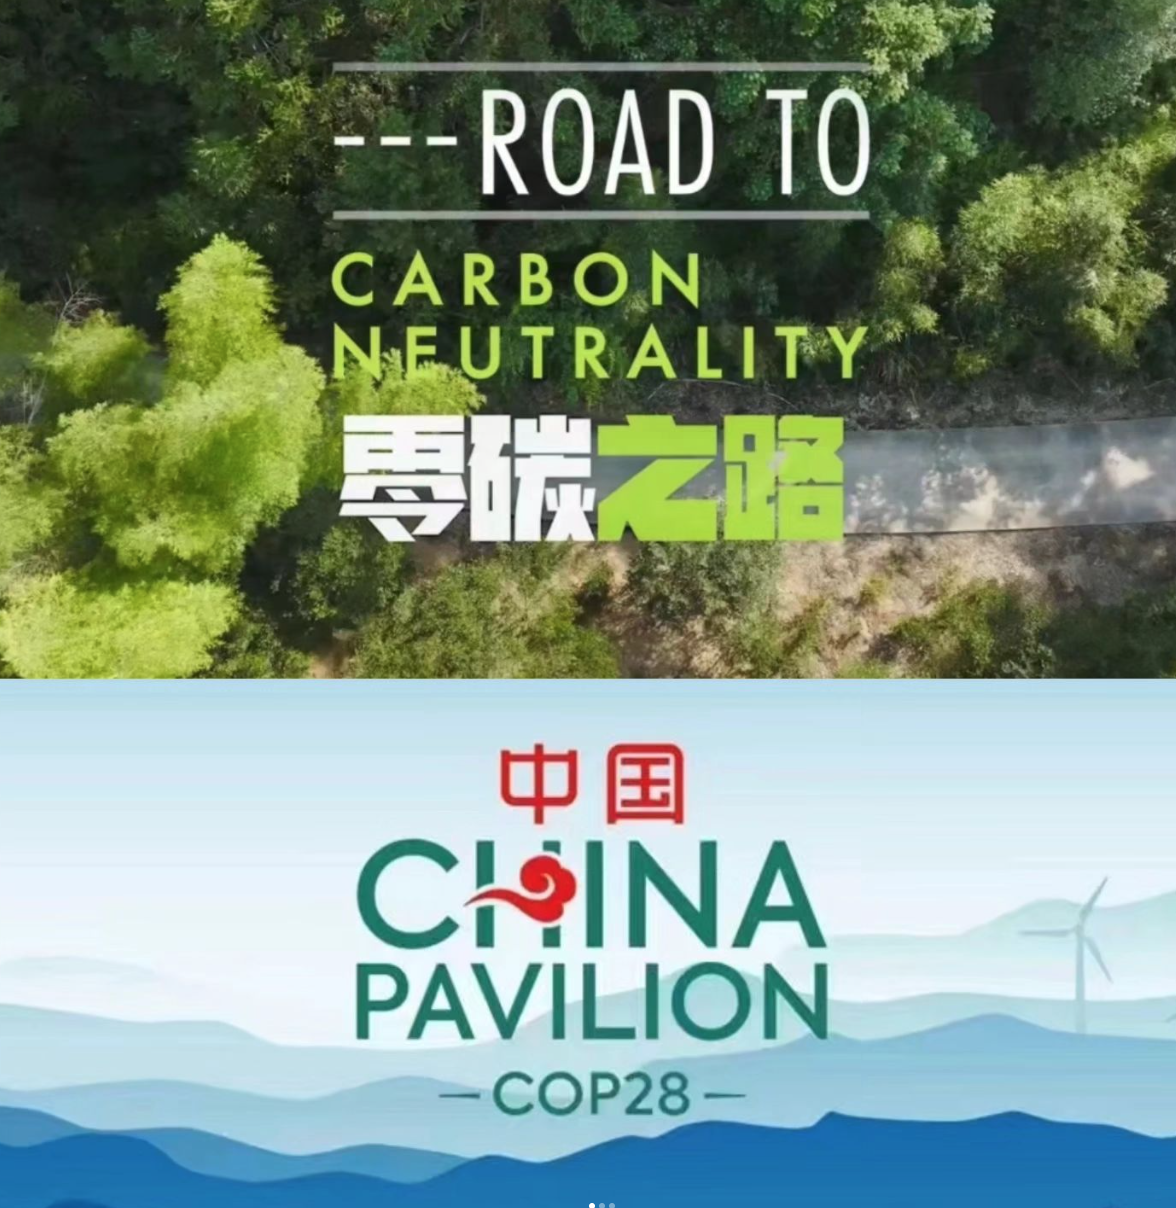 china-road-carbon-neutrality-cop28-climate-change-photographer-sean-gallagher